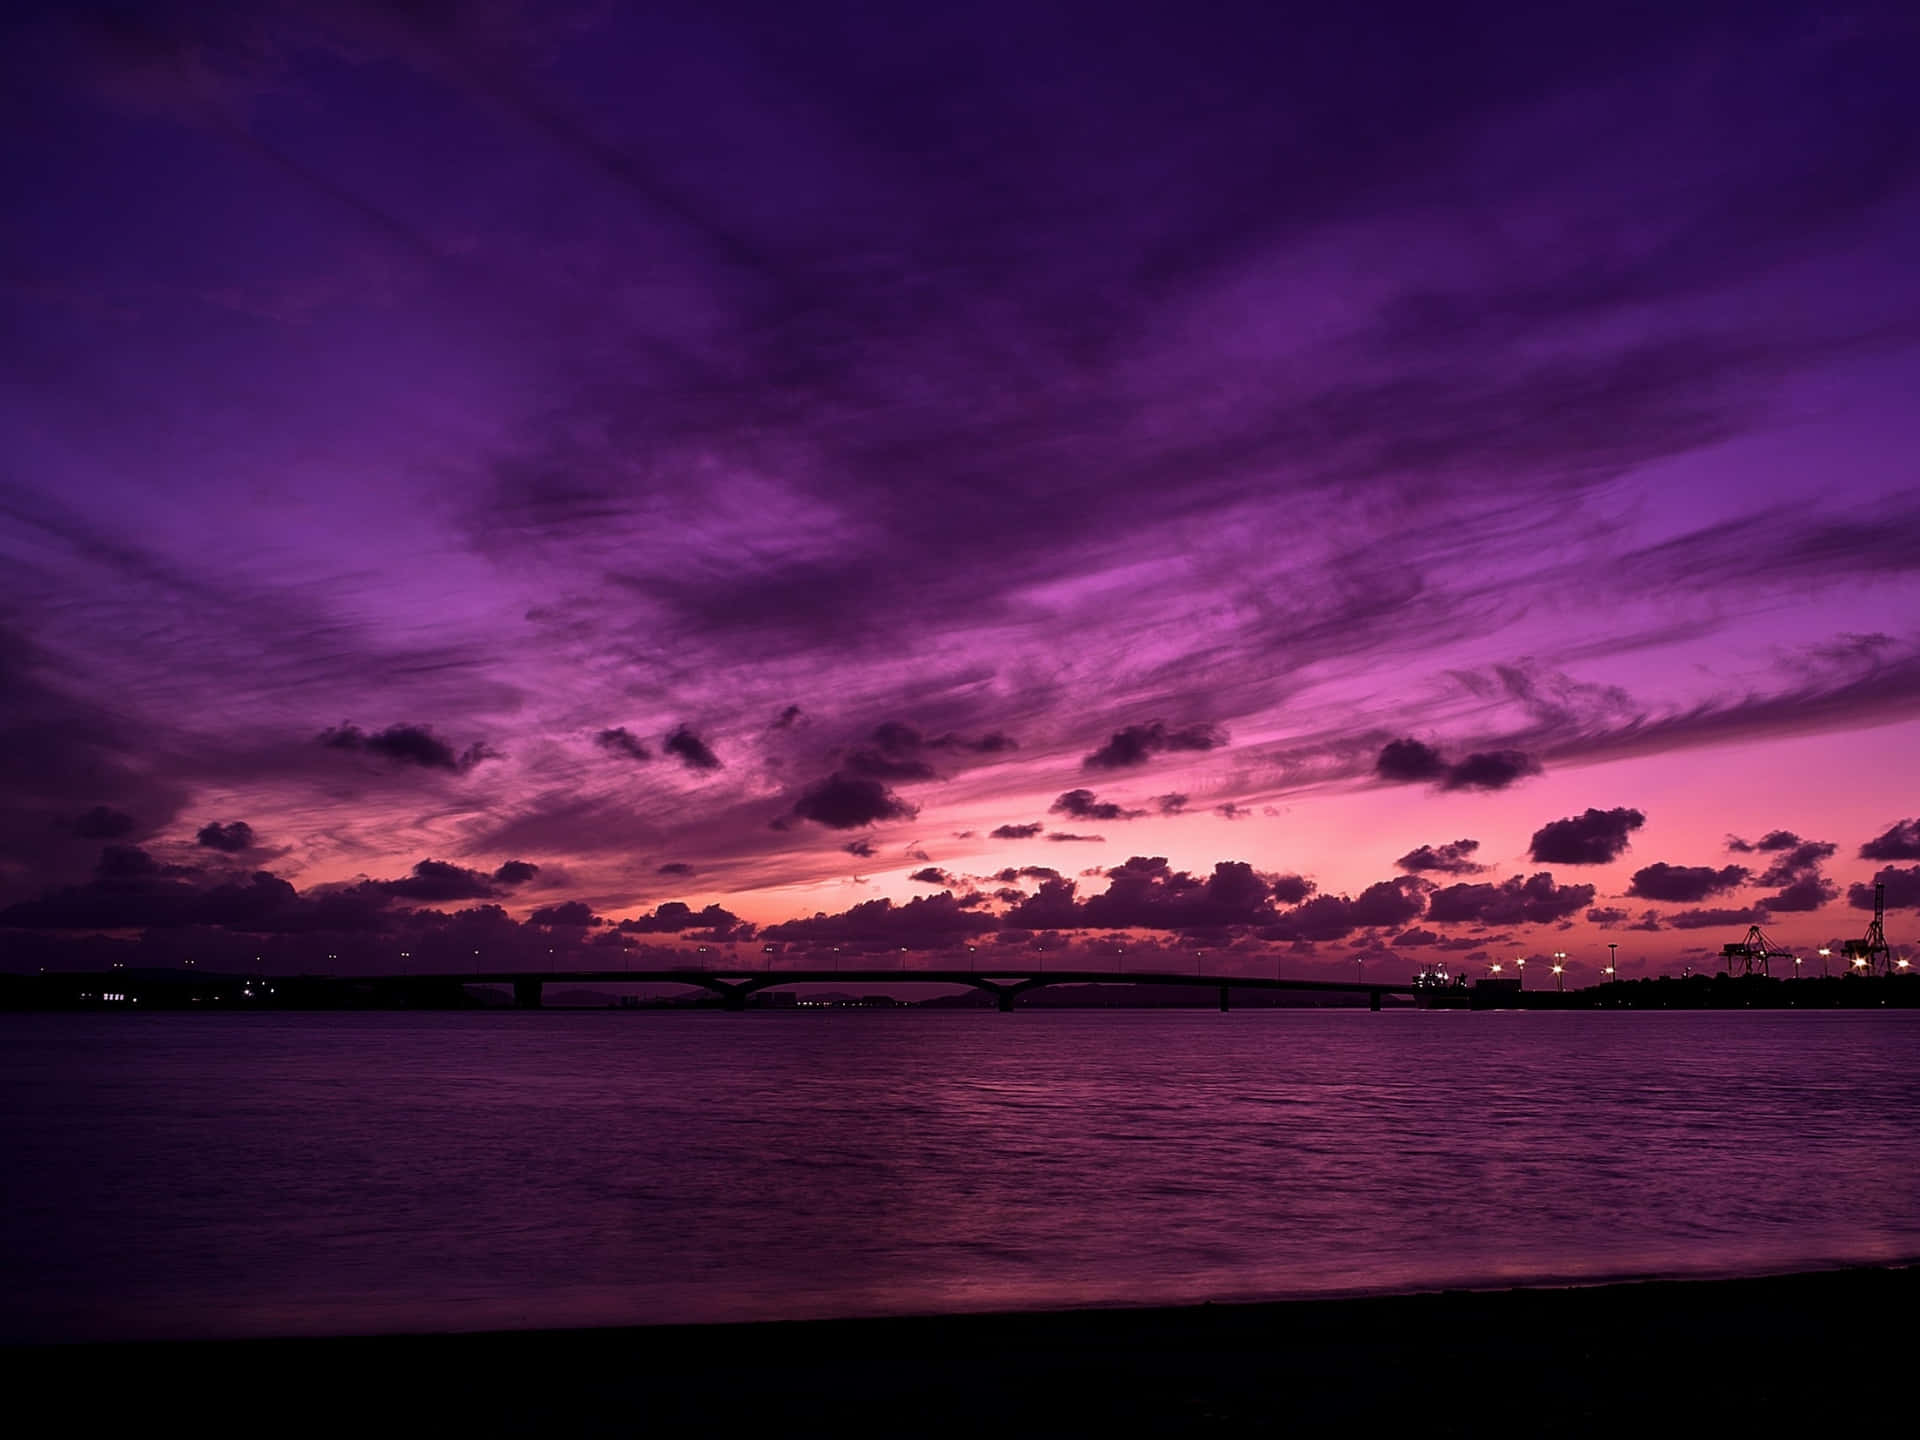 "A magnificent evening with a breathtaking blue and purple sunset" Wallpaper